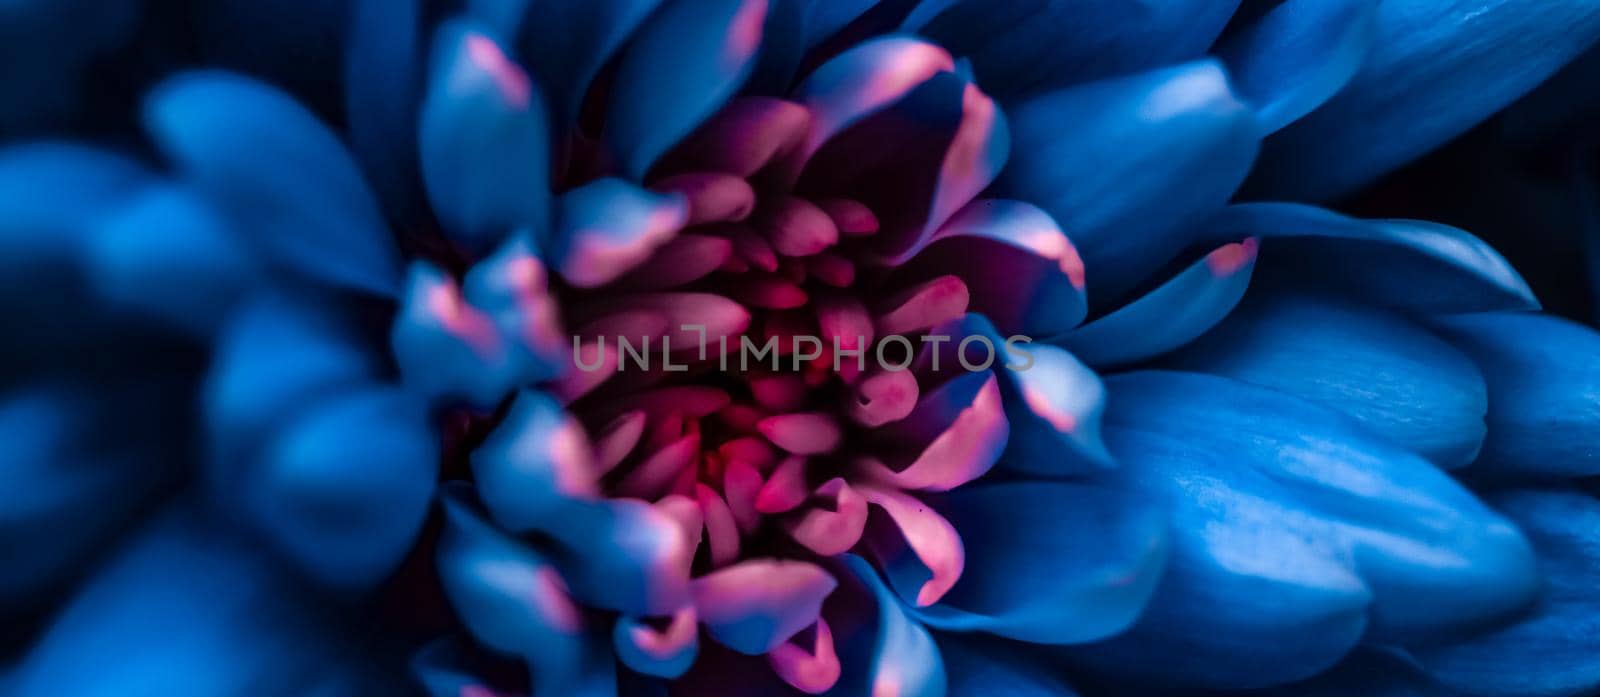 Flora, branding and love concept - Blue daisy flower petals in bloom, abstract floral blossom art background, flowers in spring nature for perfume scent, wedding, luxury beauty brand holiday design